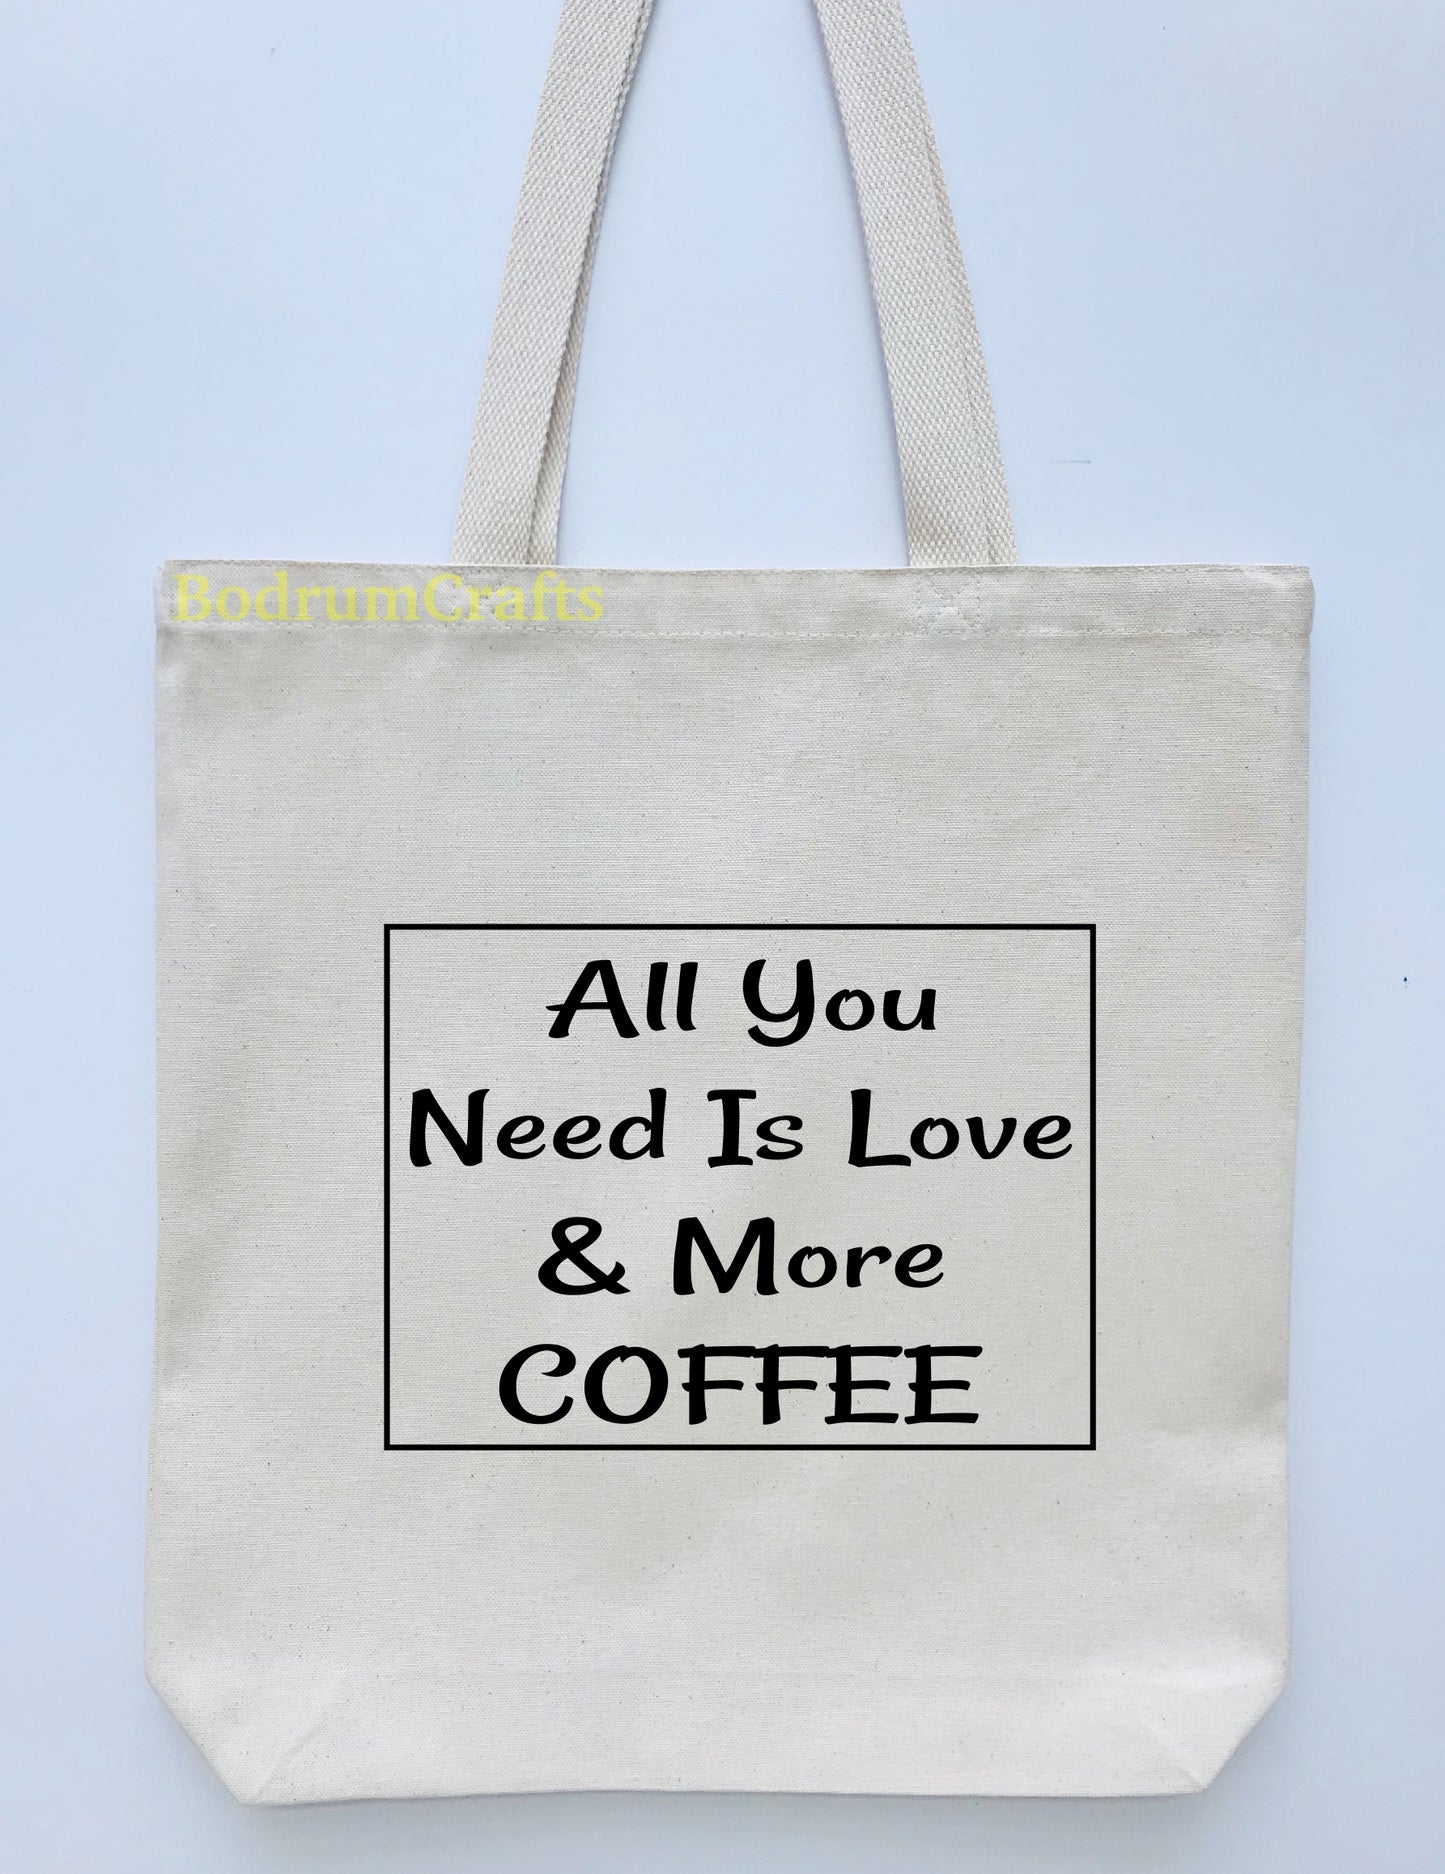 Coffee Design Printed Canvas Tote Bag, "All You Need Is Love & More Coffee"